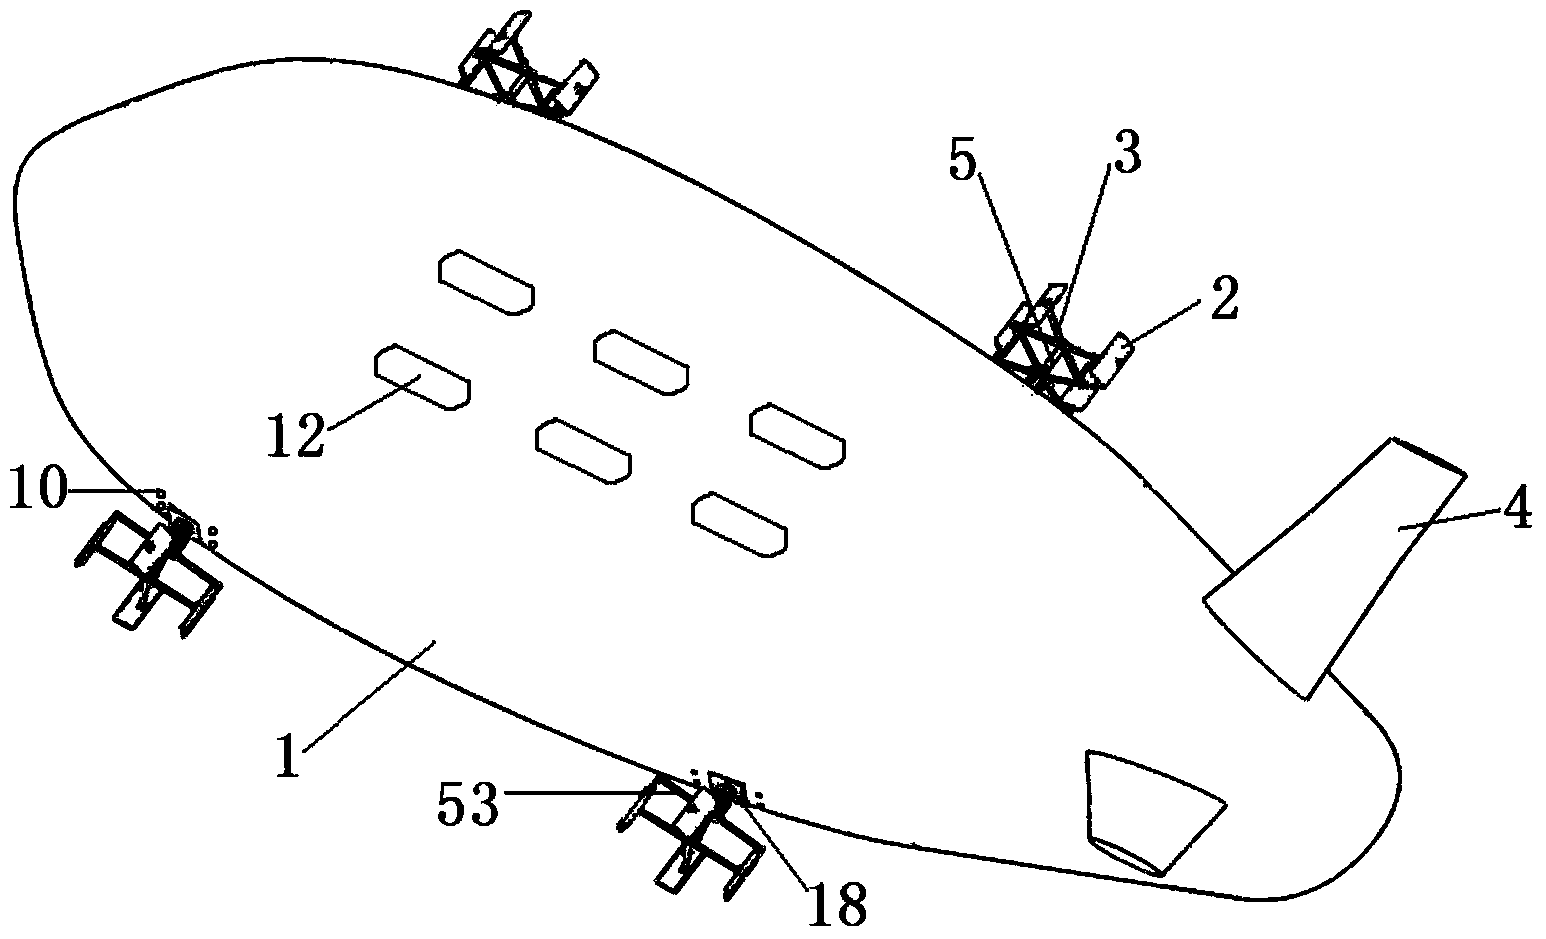 Hybrid power airship adopting inflated wings and cycloidal propellers